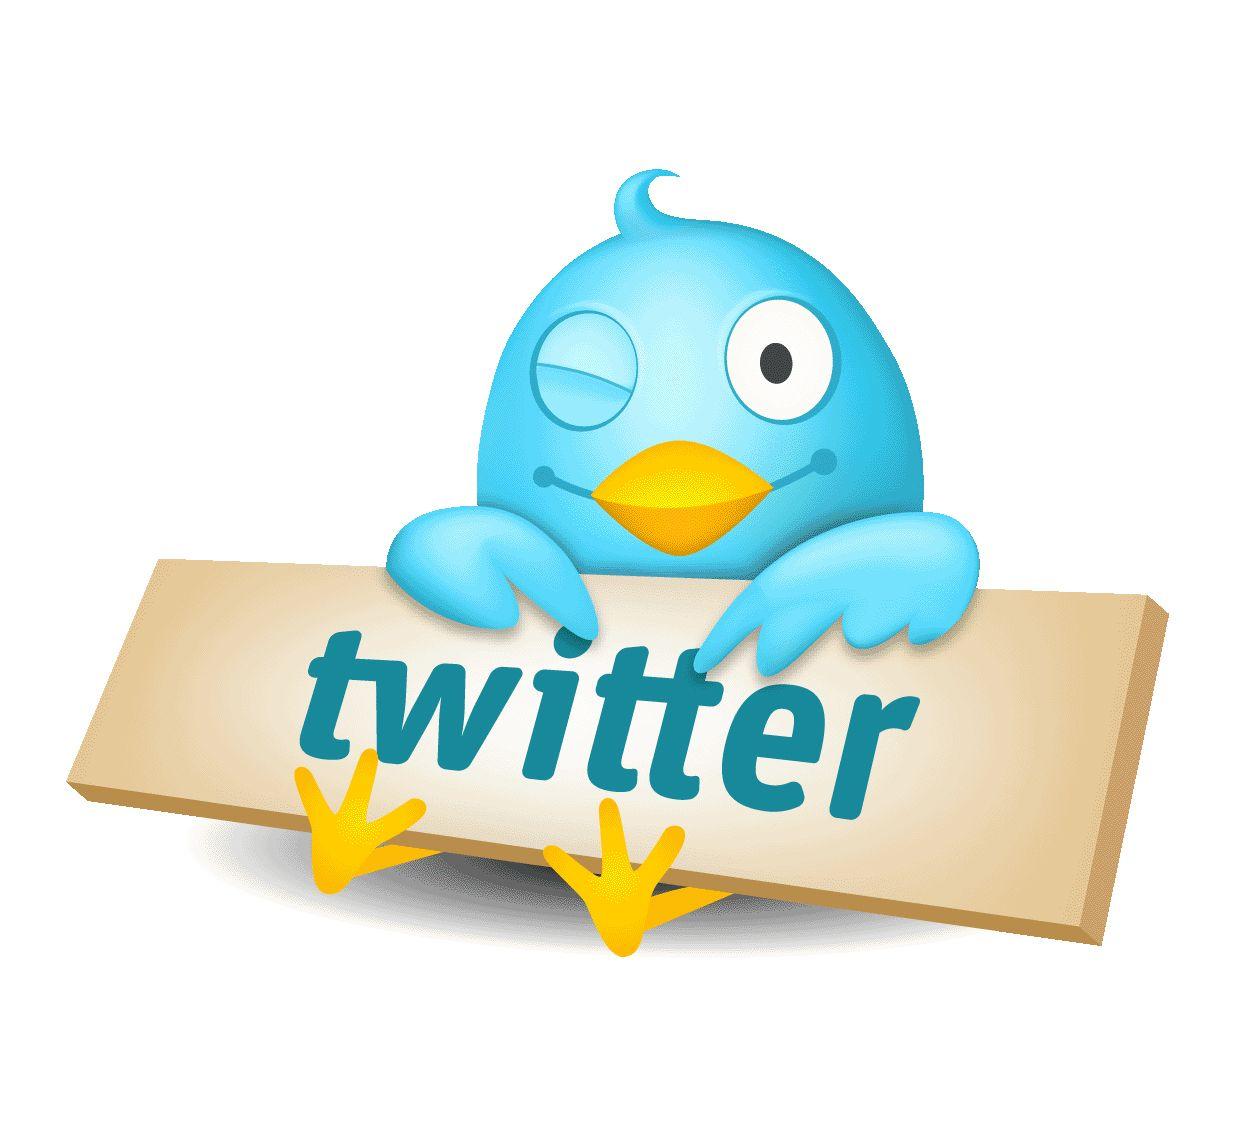 Funny Twitter Logo - More of the Funniest Personal Statement Tweets - edityour.net